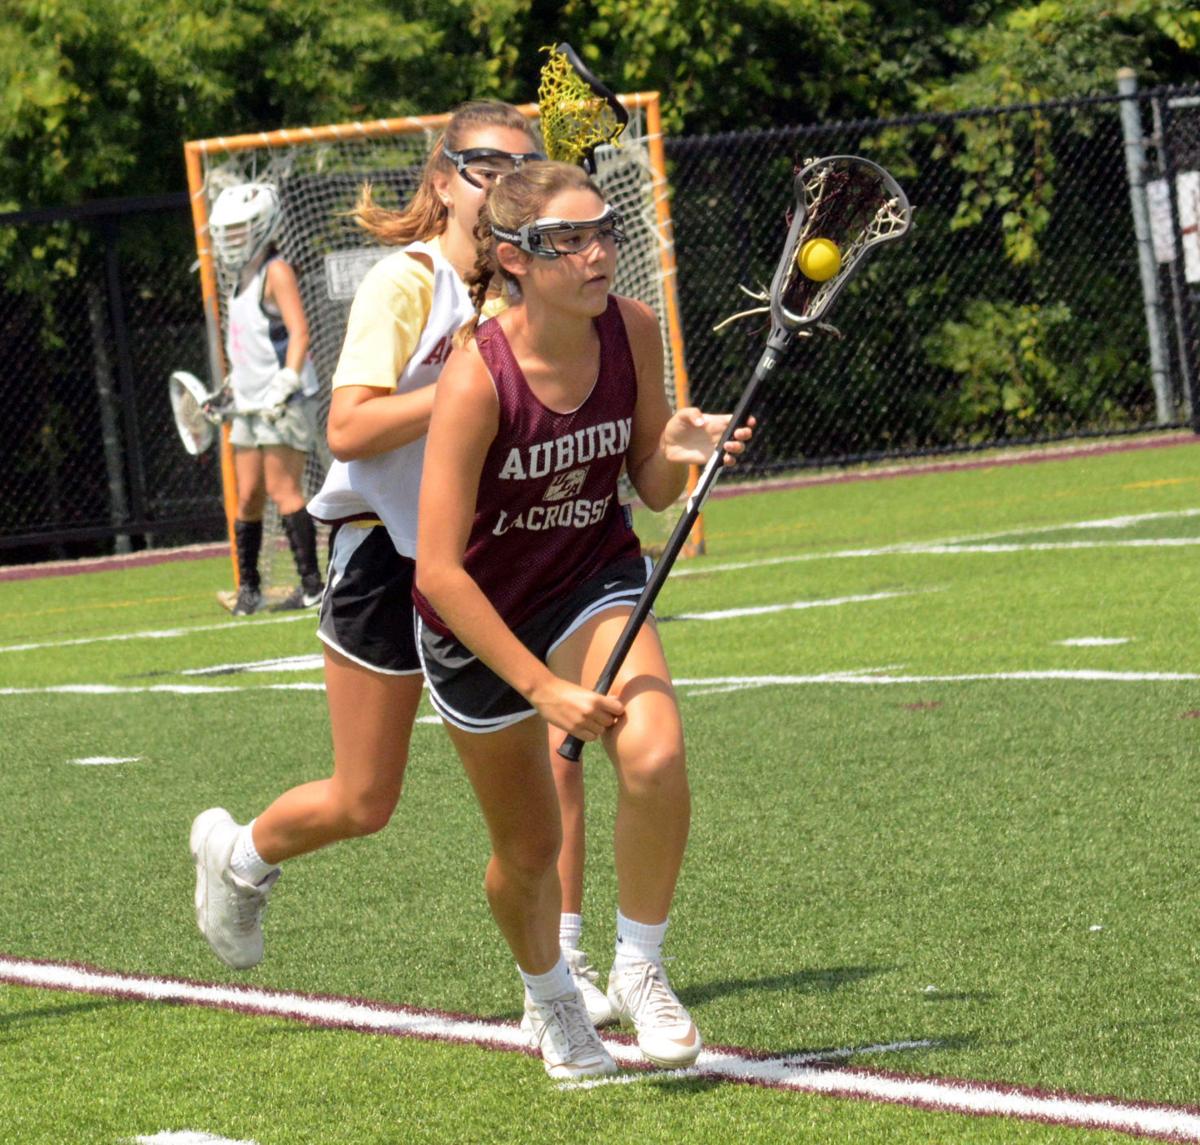 Auburn girls lacrosse continues busy summer with tournament, camp